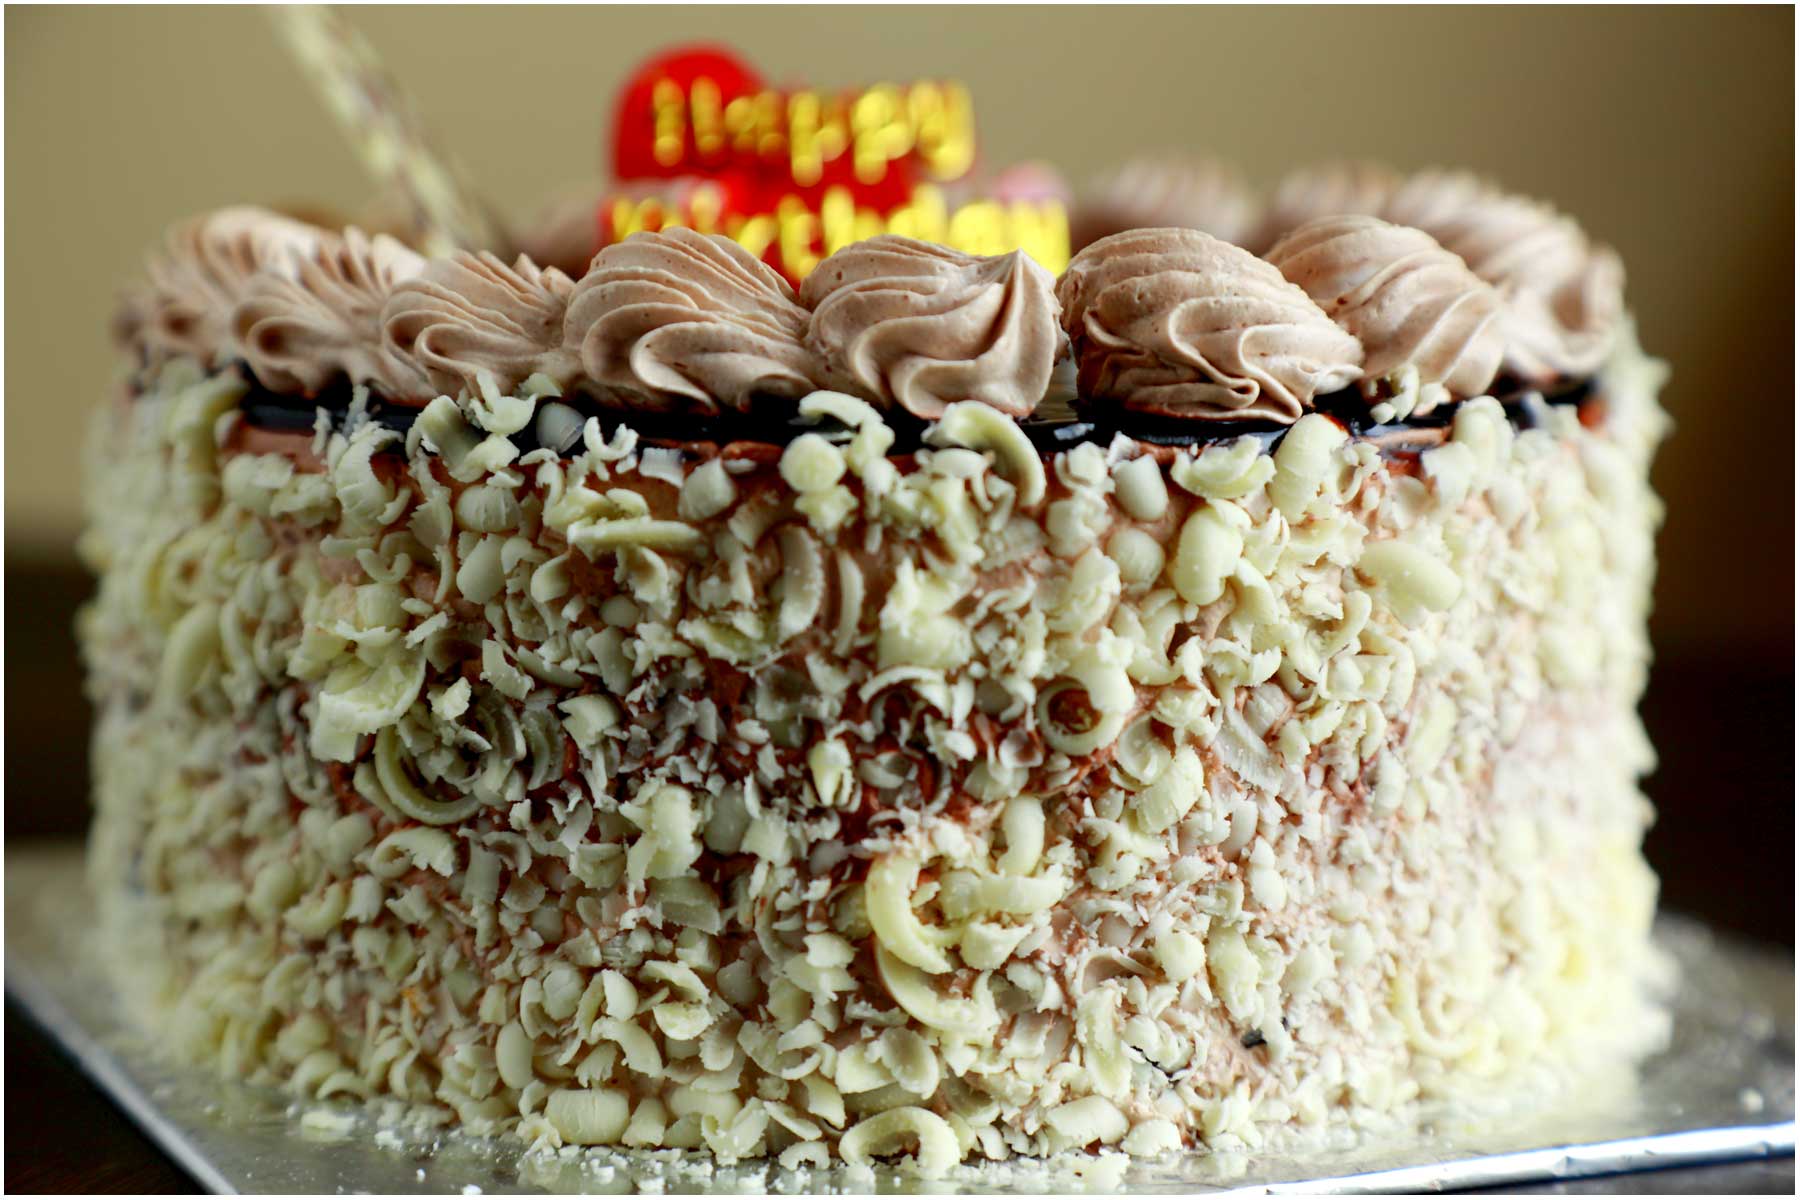 a cake with whipped cream and chocolate toppings